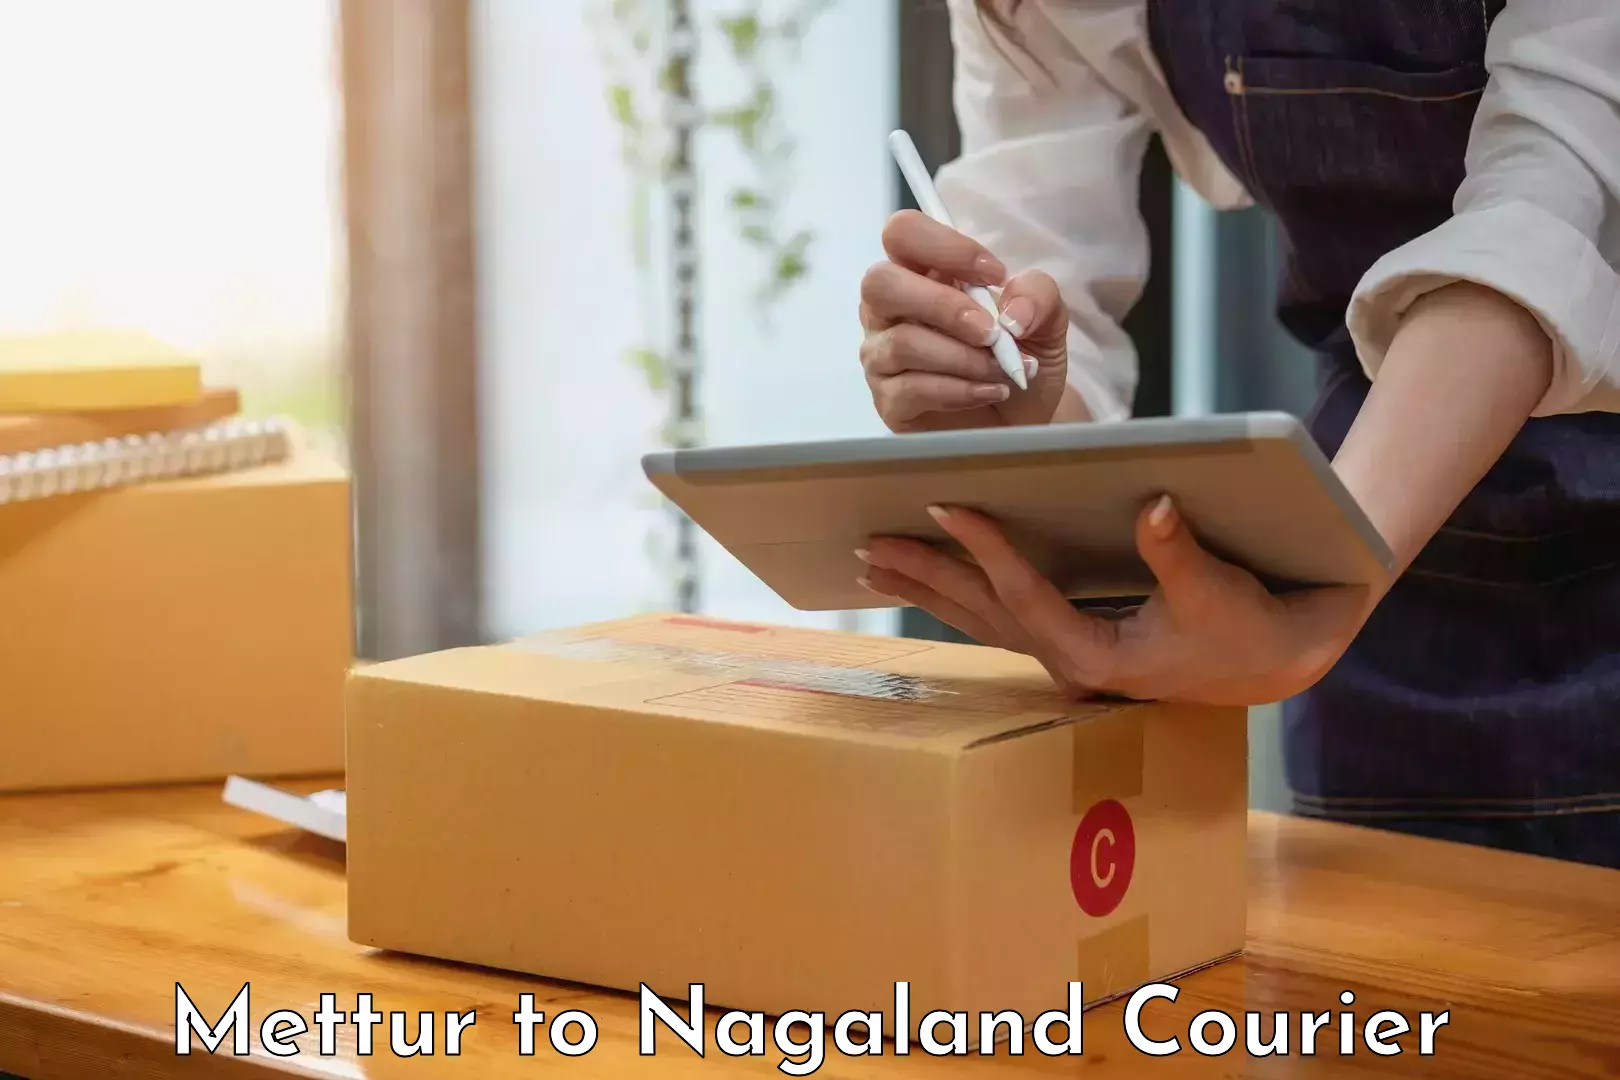 Residential courier service Mettur to Nagaland